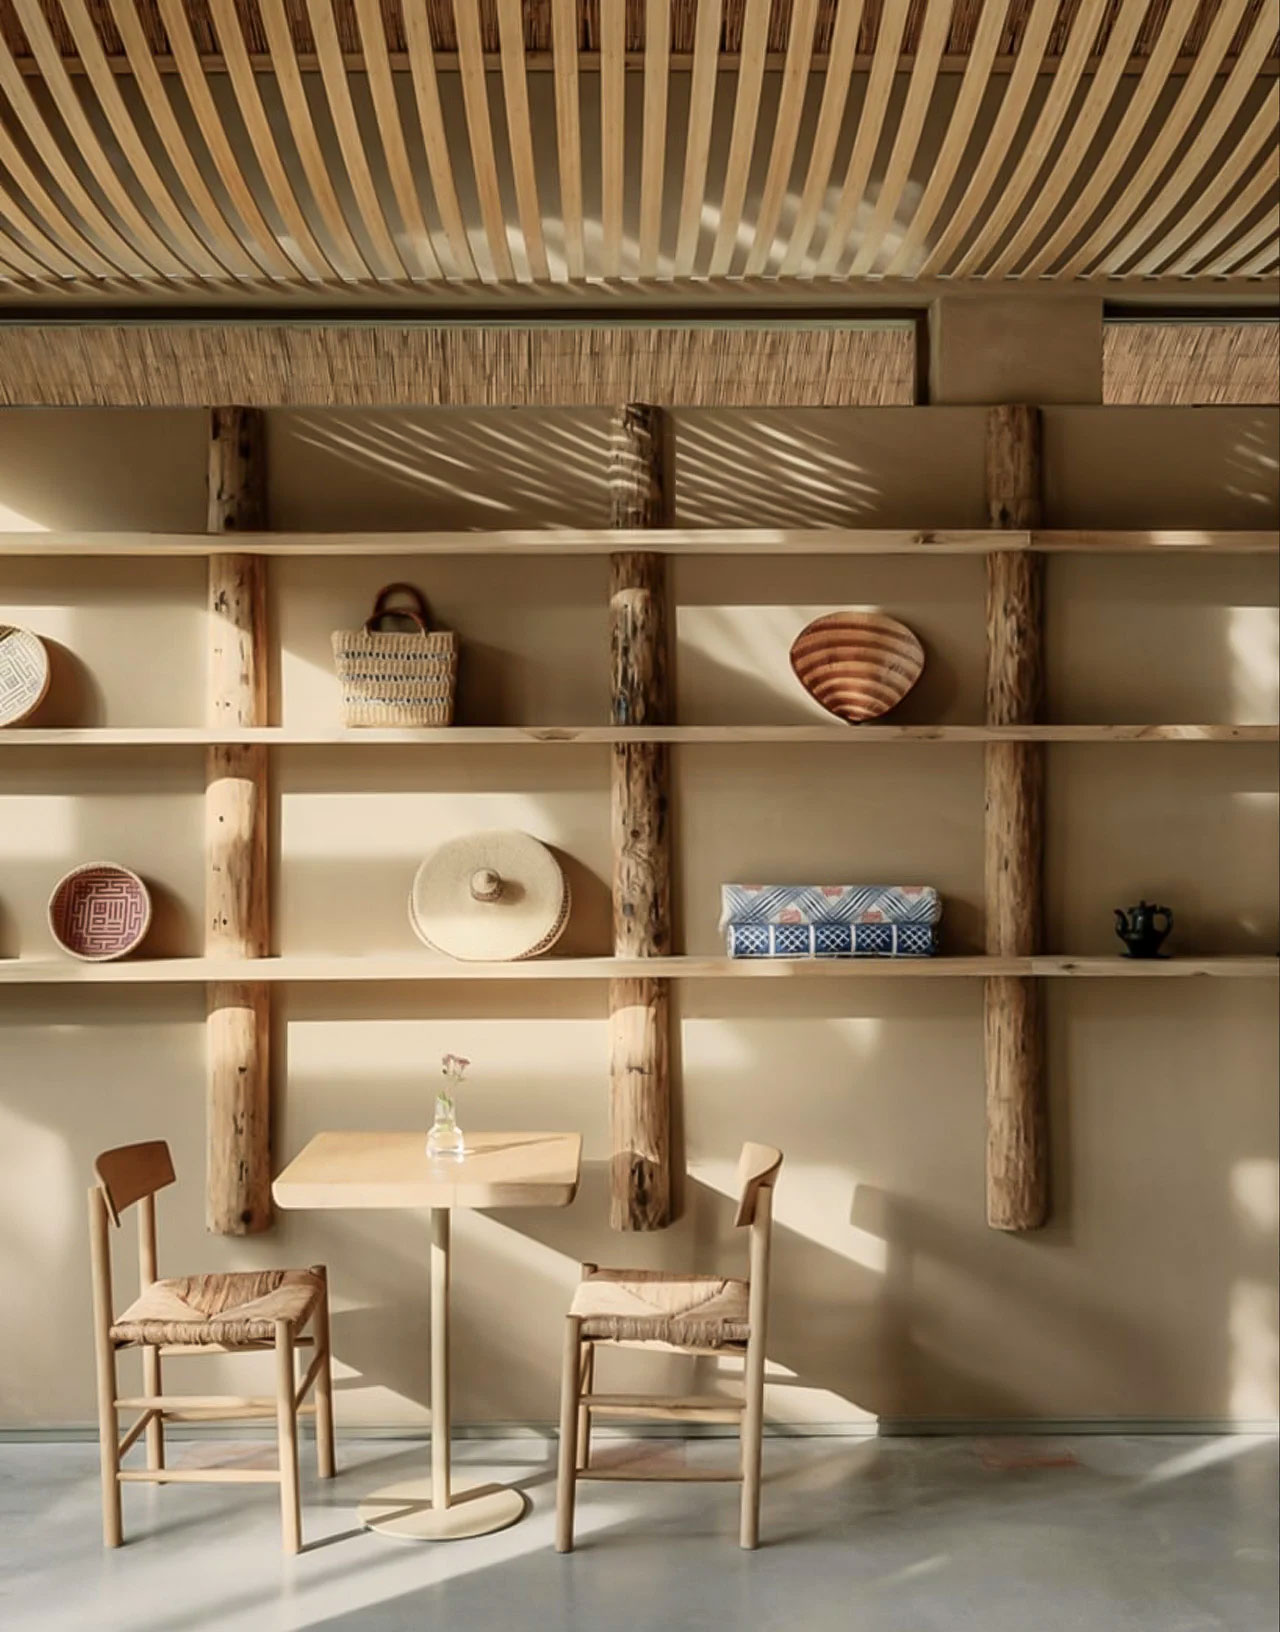 This quaint hostel in Shanghai was built using recycled red bricks, natural clay, and reed bundles